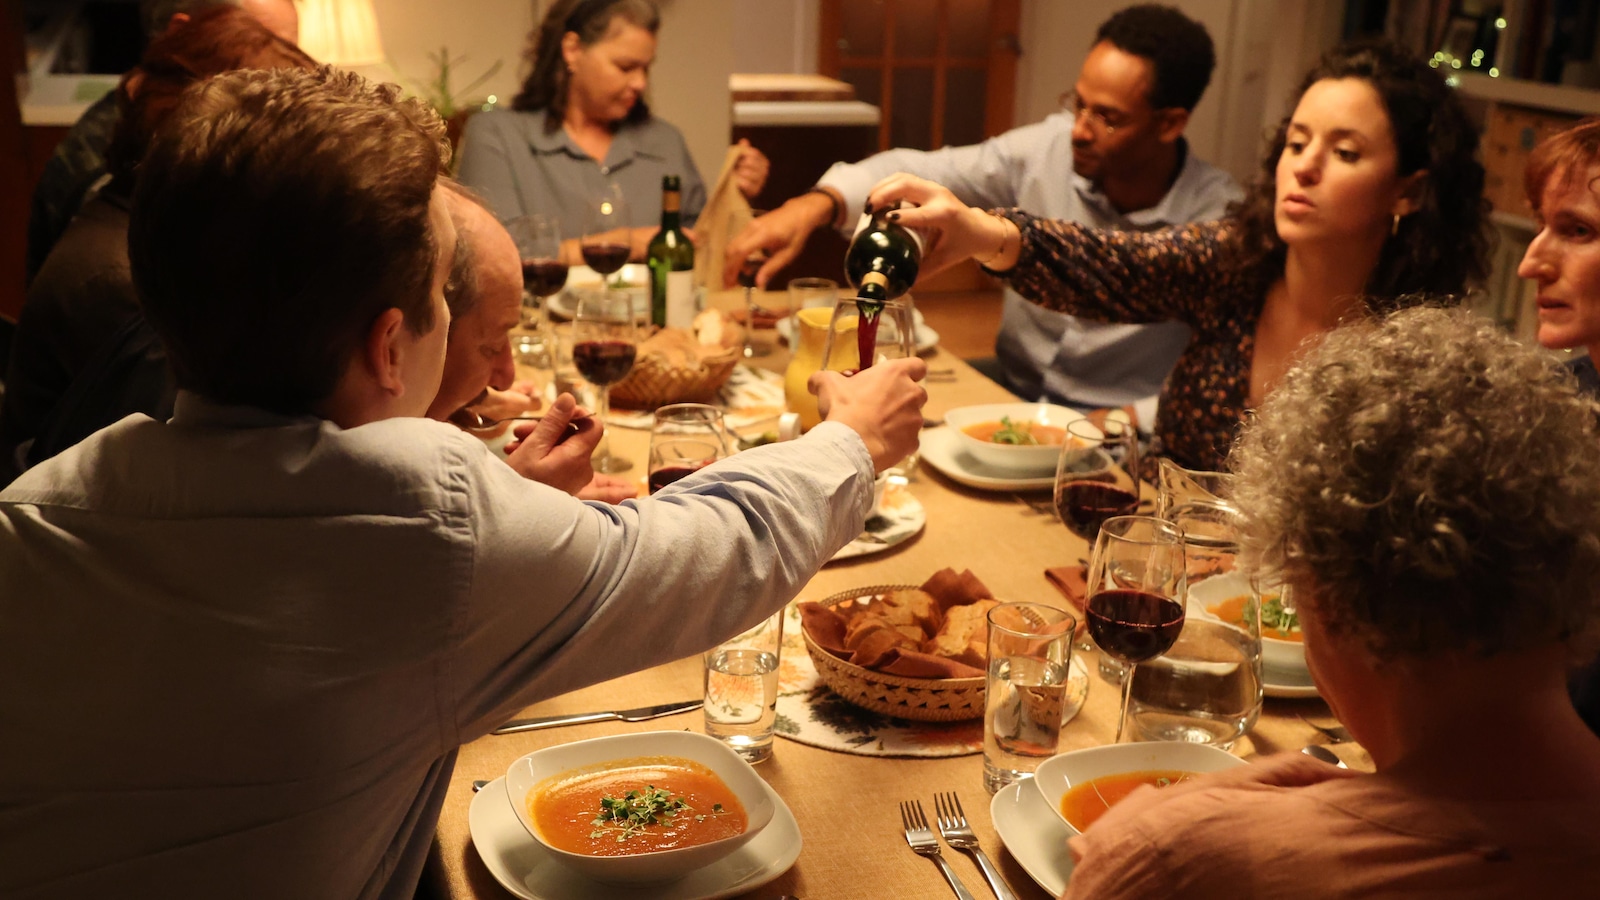 Several people share a meal at a table and one person serves red wine to one of the guests. 